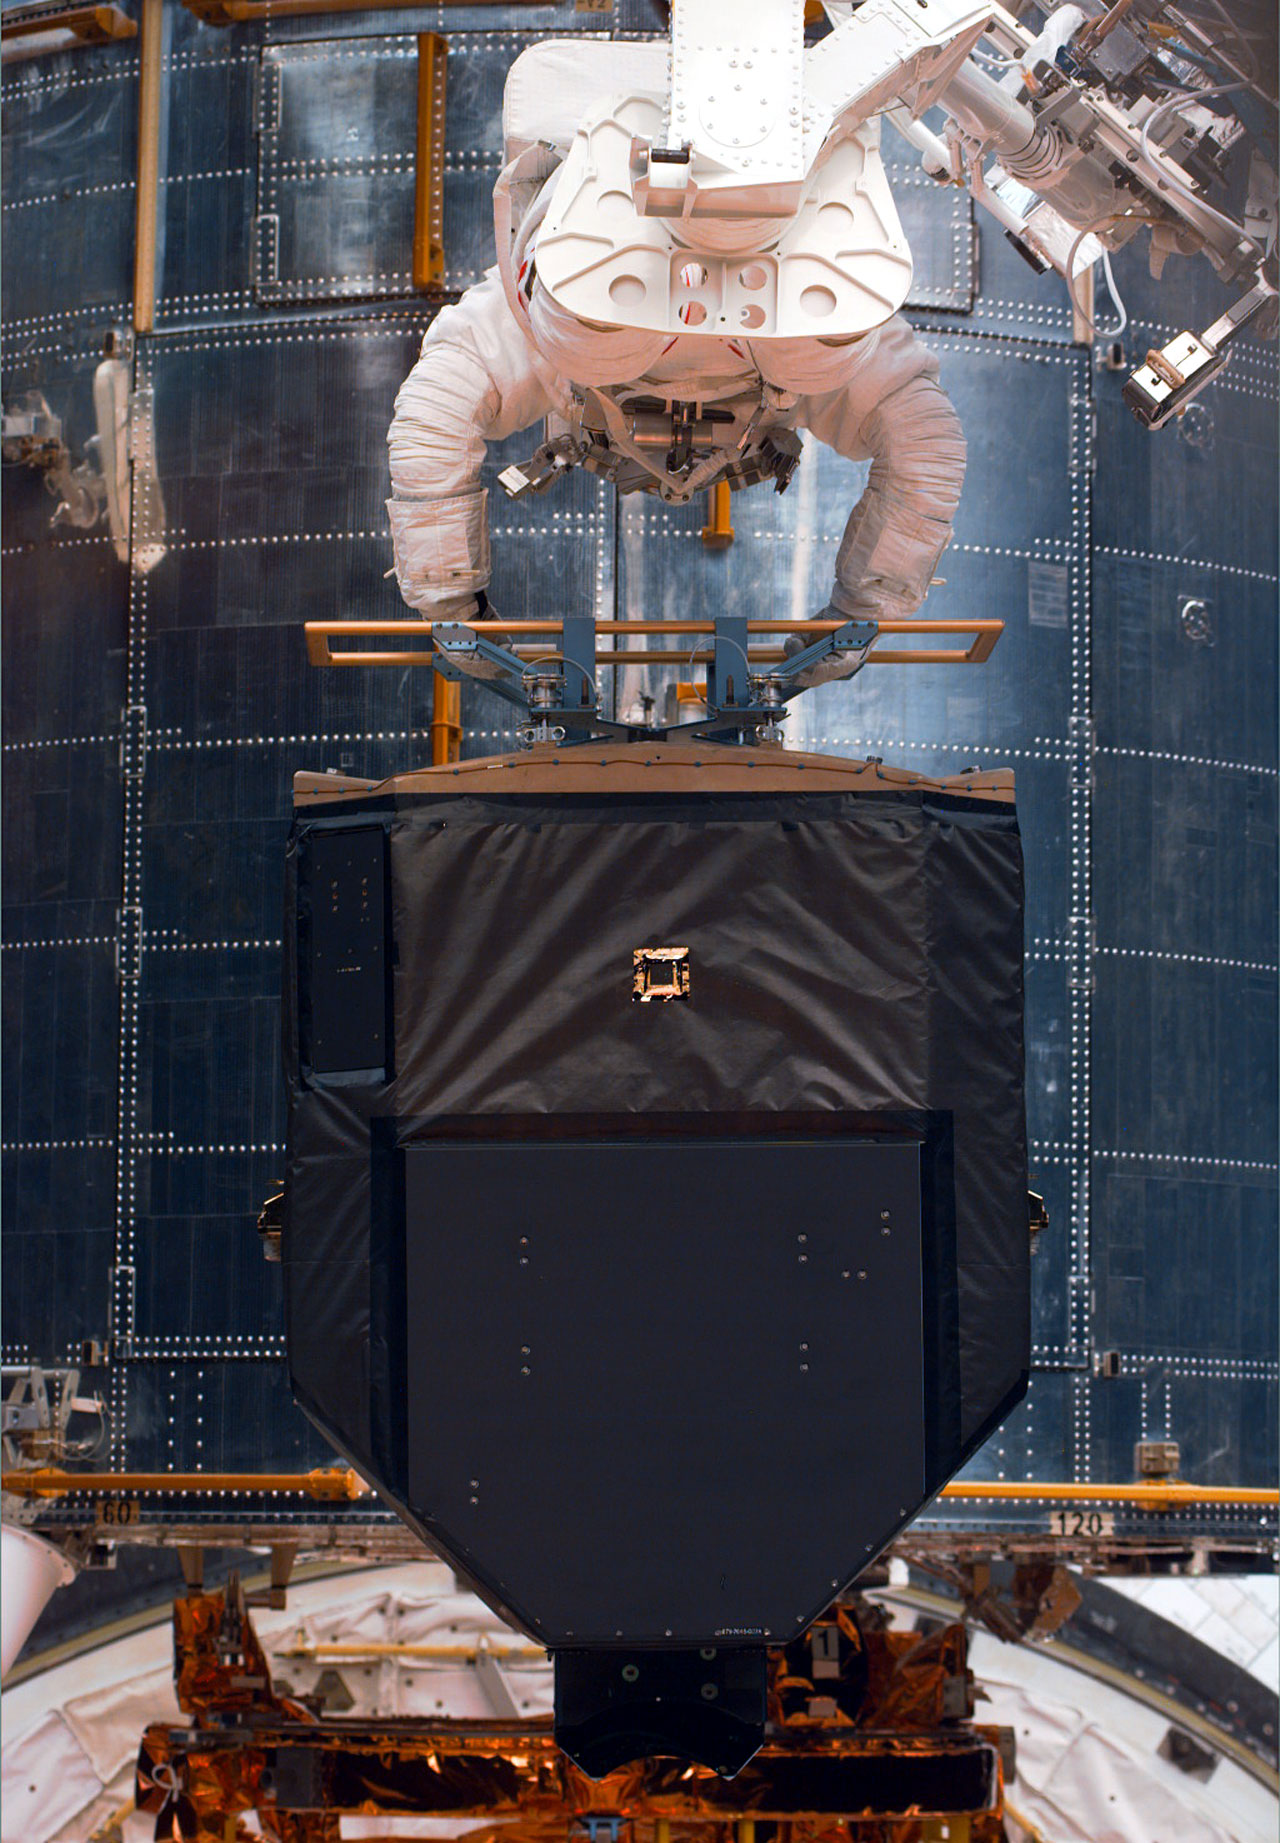  One of the three Fine Guidance Sensors fotographed during Second Servicing Mission in 1997.